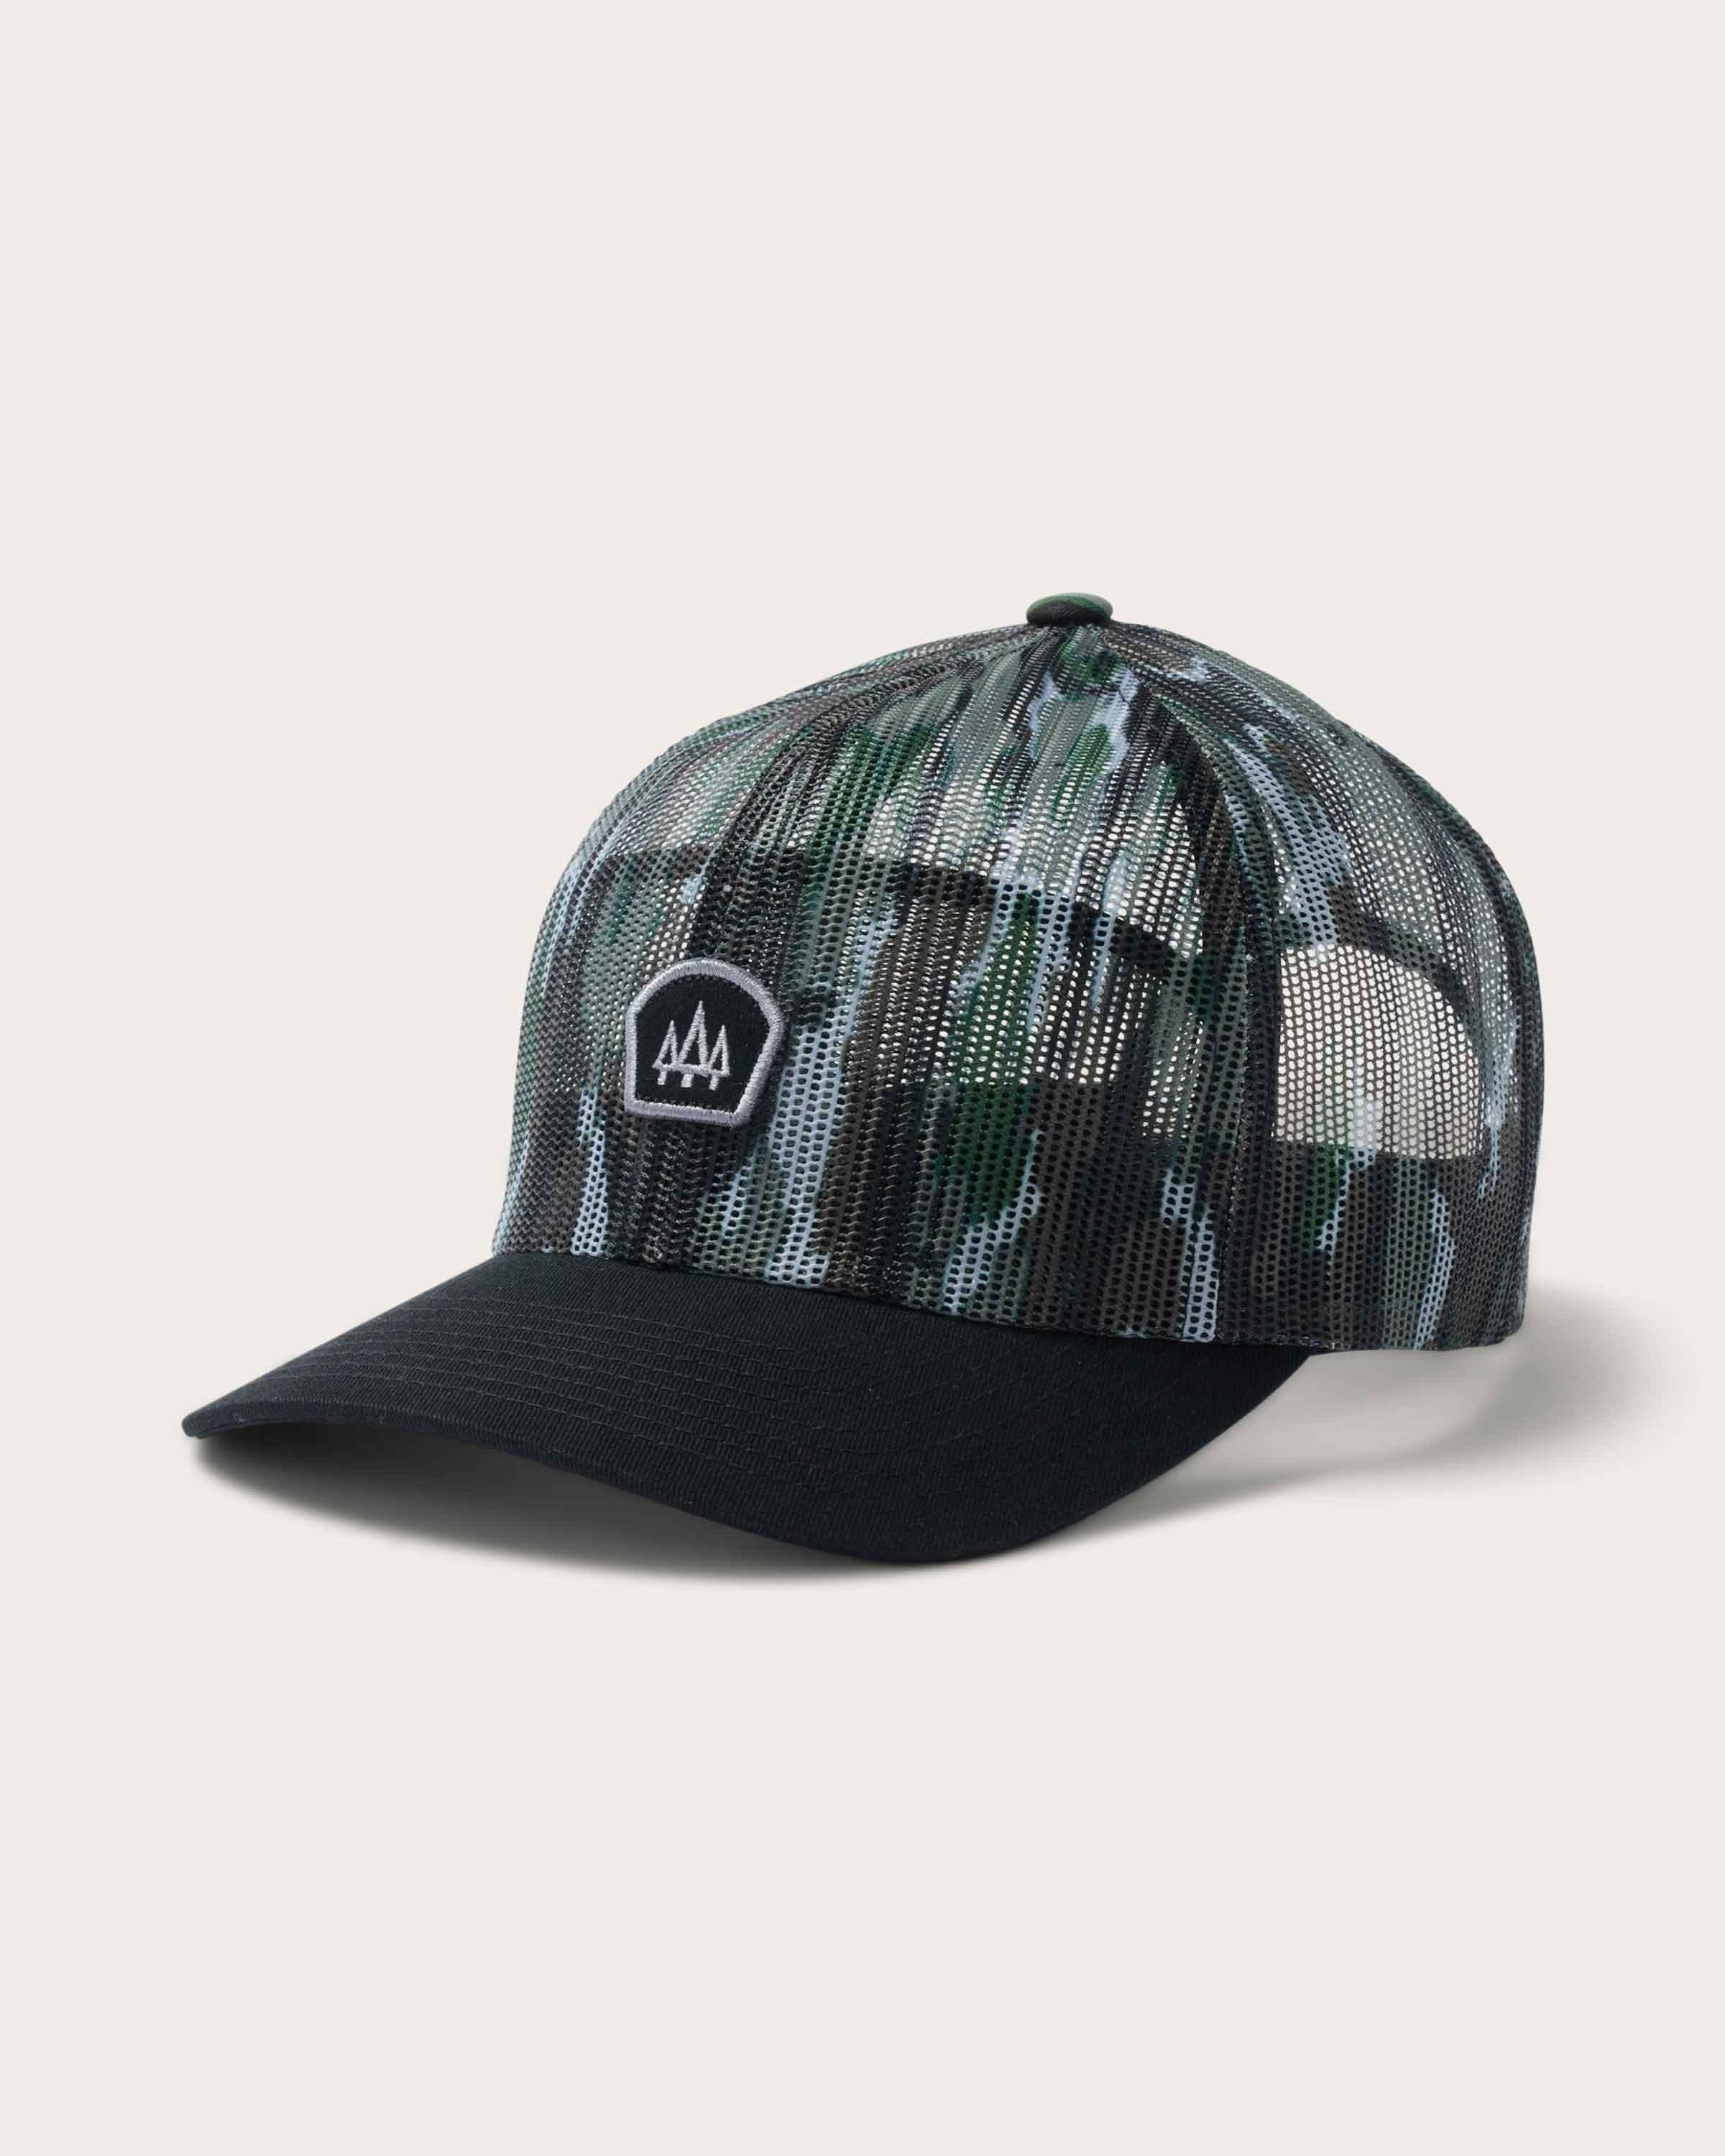 Backcountry Mesh Hat - Realtree® Camo - undefined - Hemlock Hat Co. Ball Caps